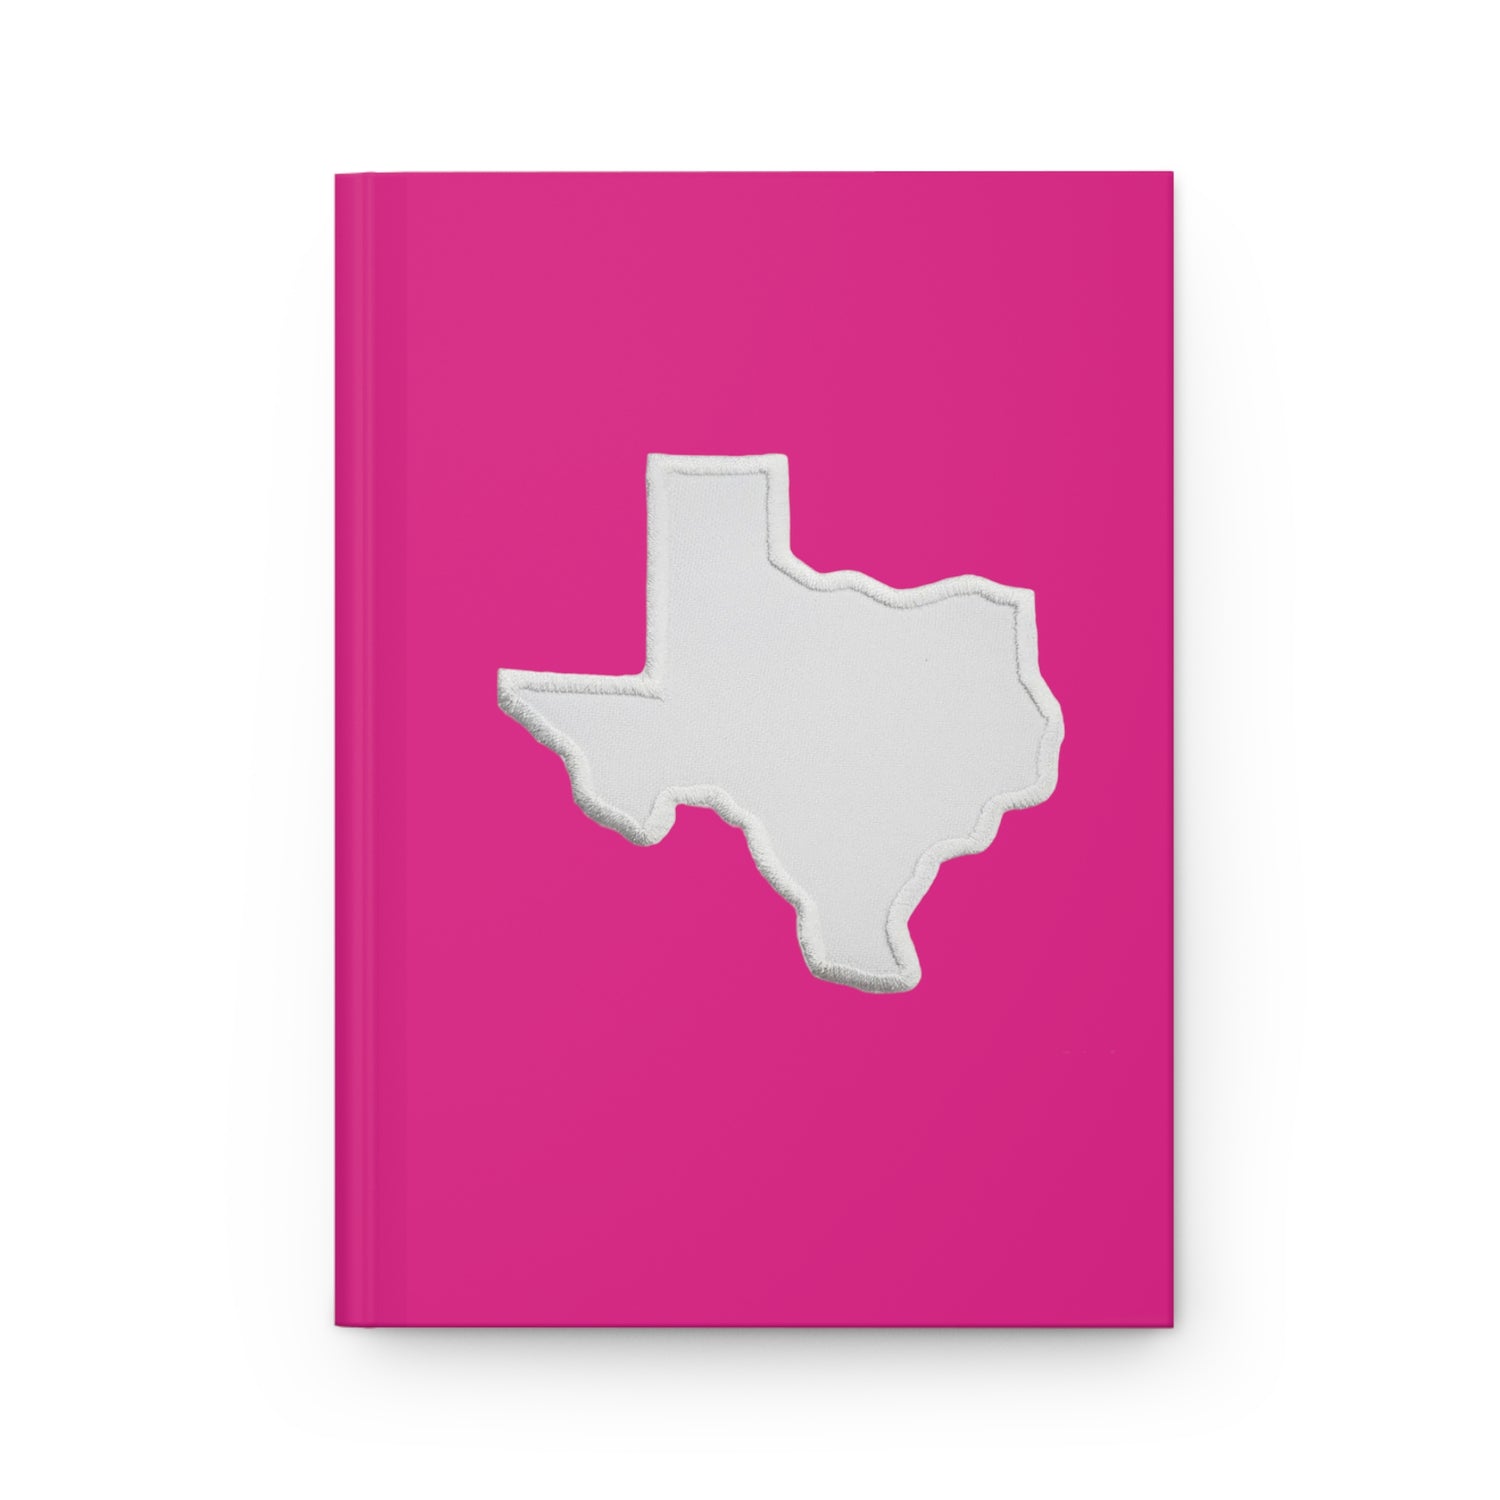 Texas Barbie Pink and White Hardcover Journal Matte